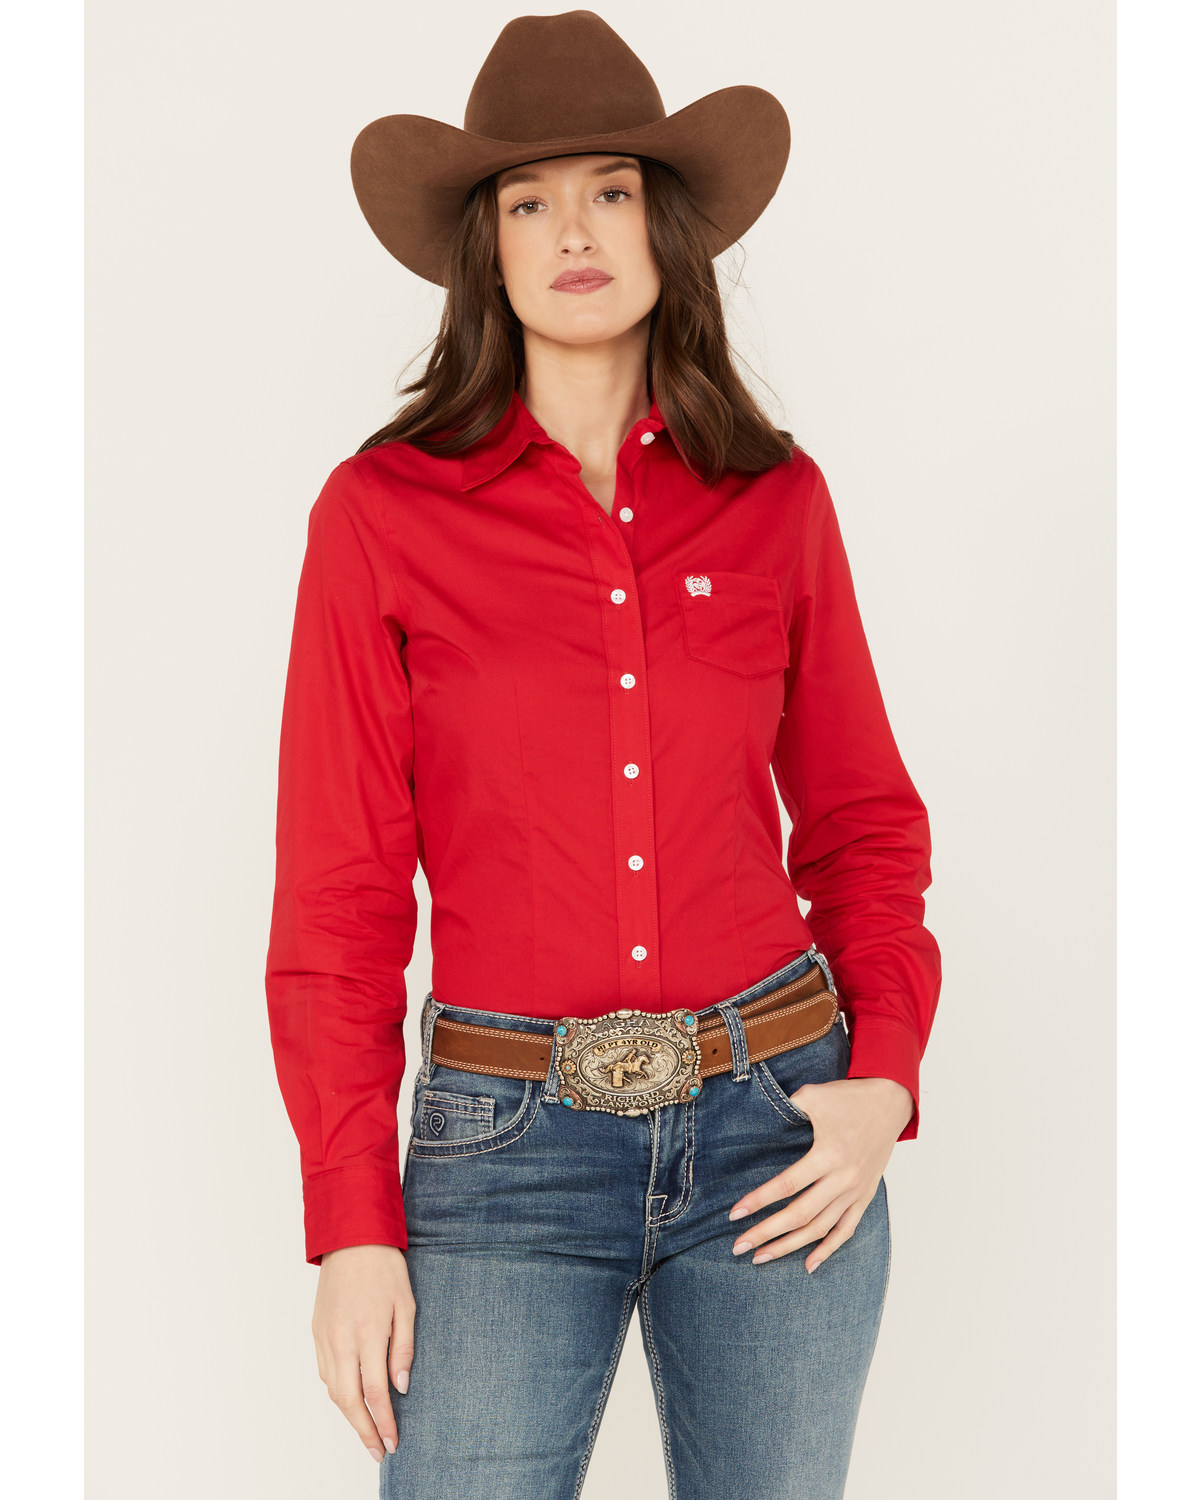 Cinch Women's Solid Red Button Down Western Shirt | Boot Barn